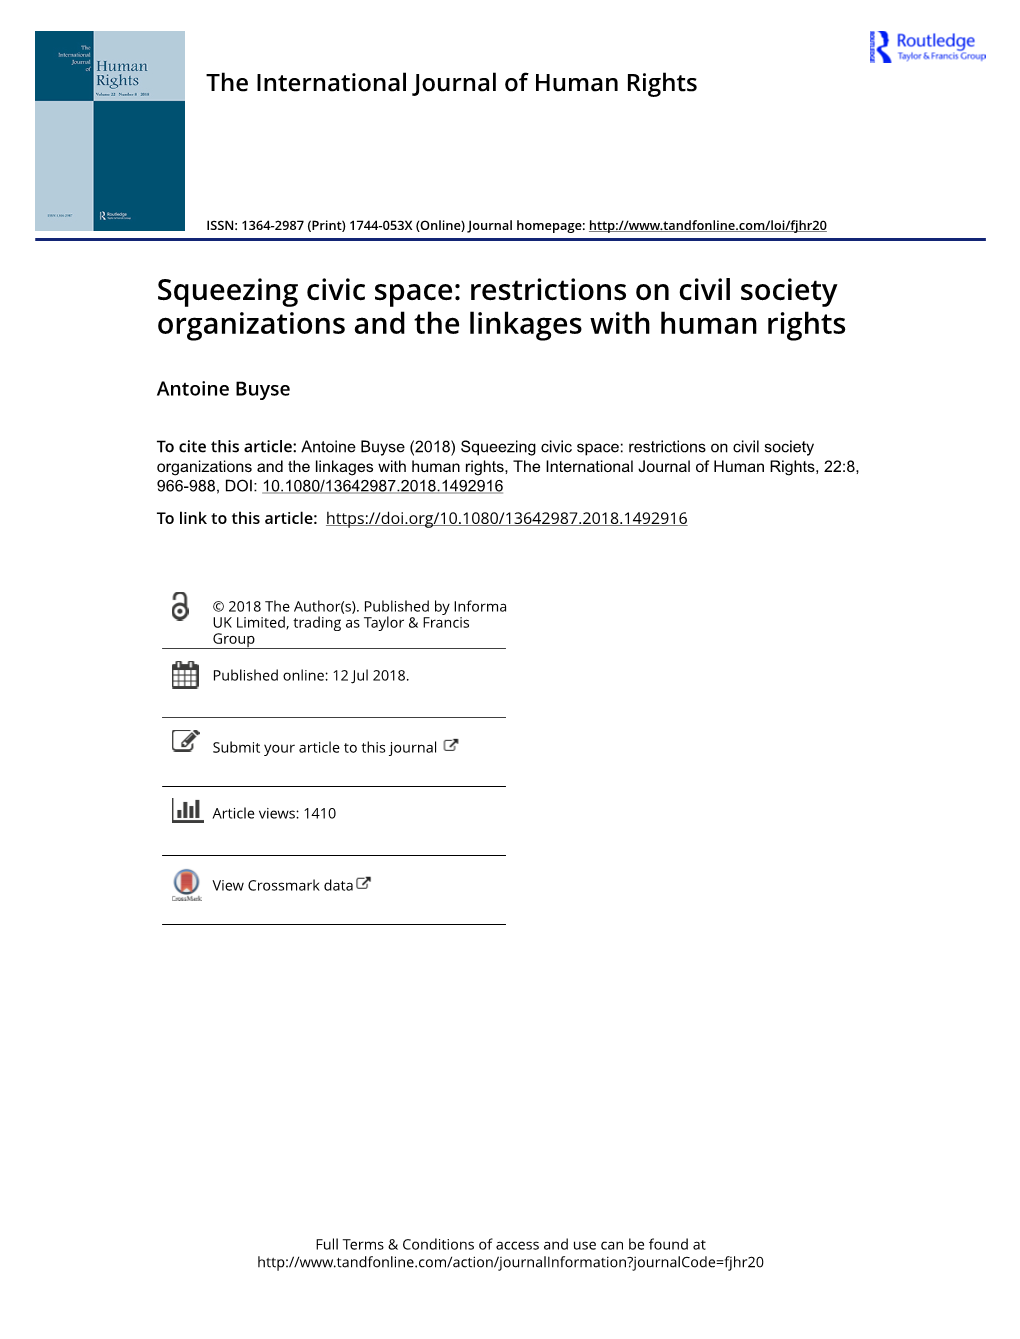 Squeezing Civic Space: Restrictions on Civil Society Organizations and the Linkages with Human Rights